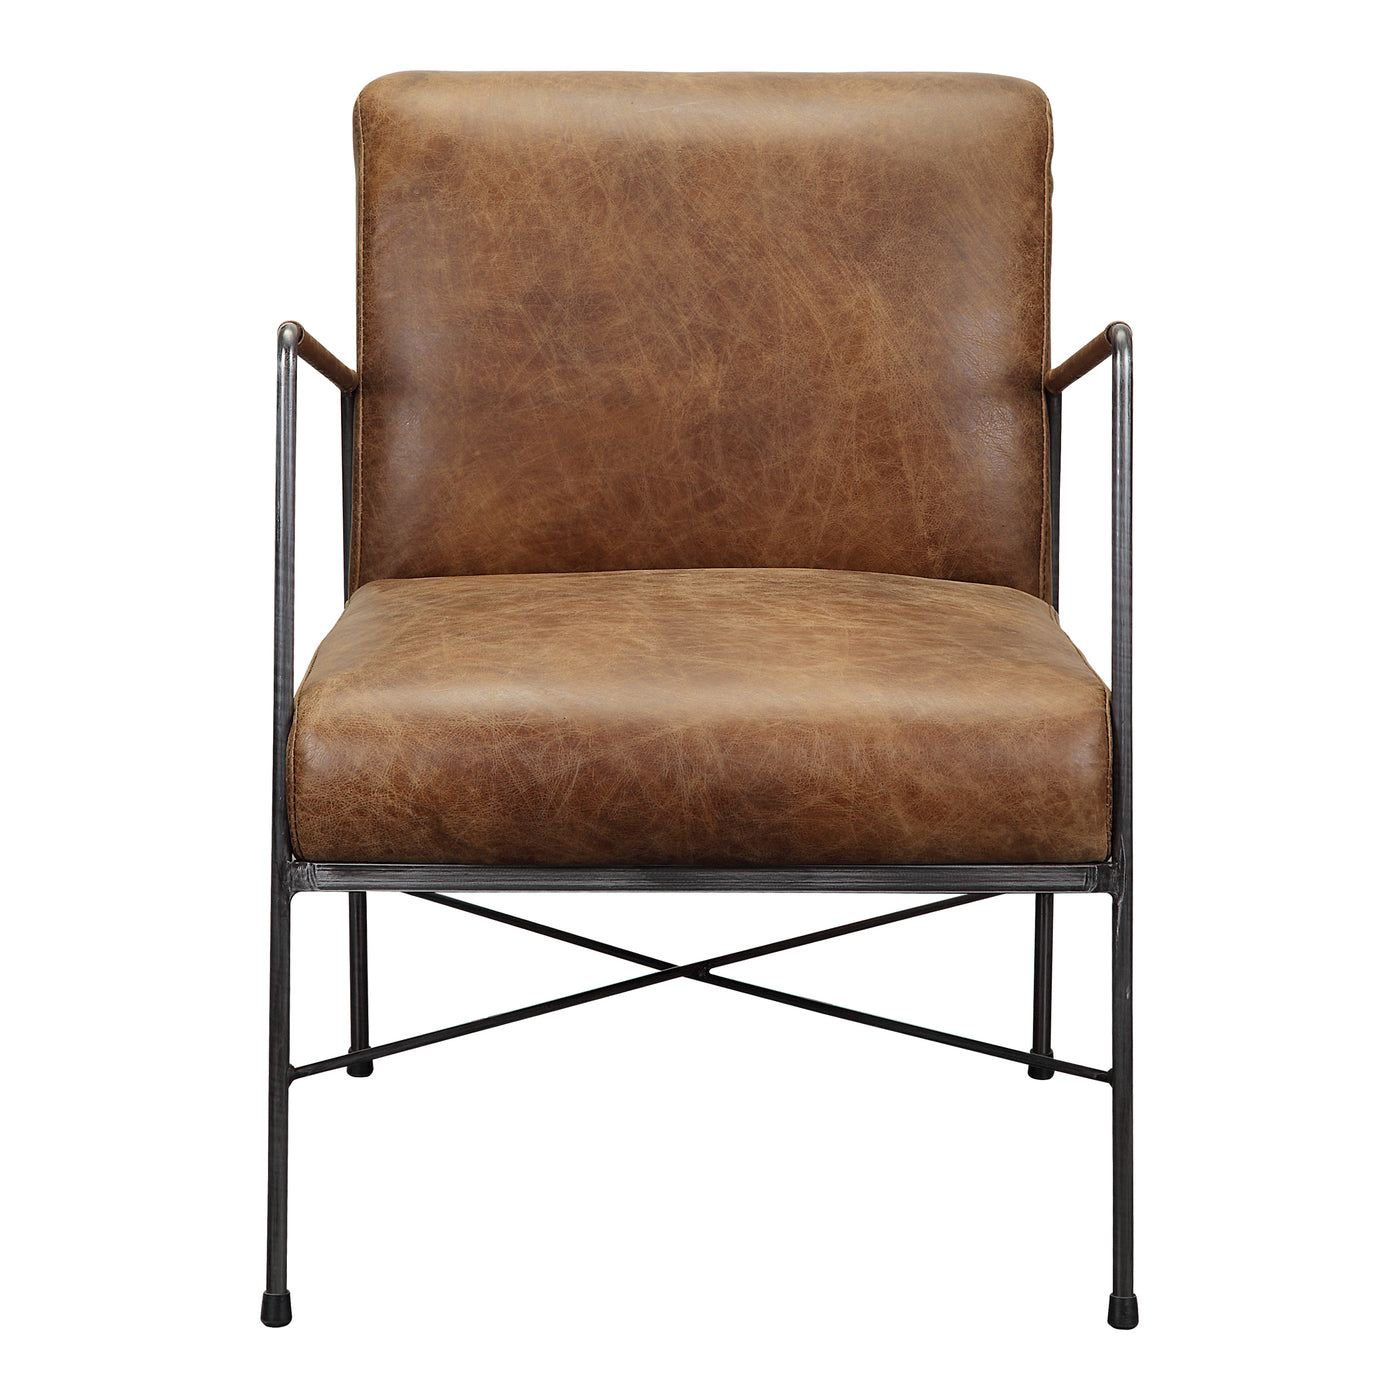 Accent your space with minimal, industrial design. A clean, comfortable addition to any decor, the Dagwood armchair ties t...